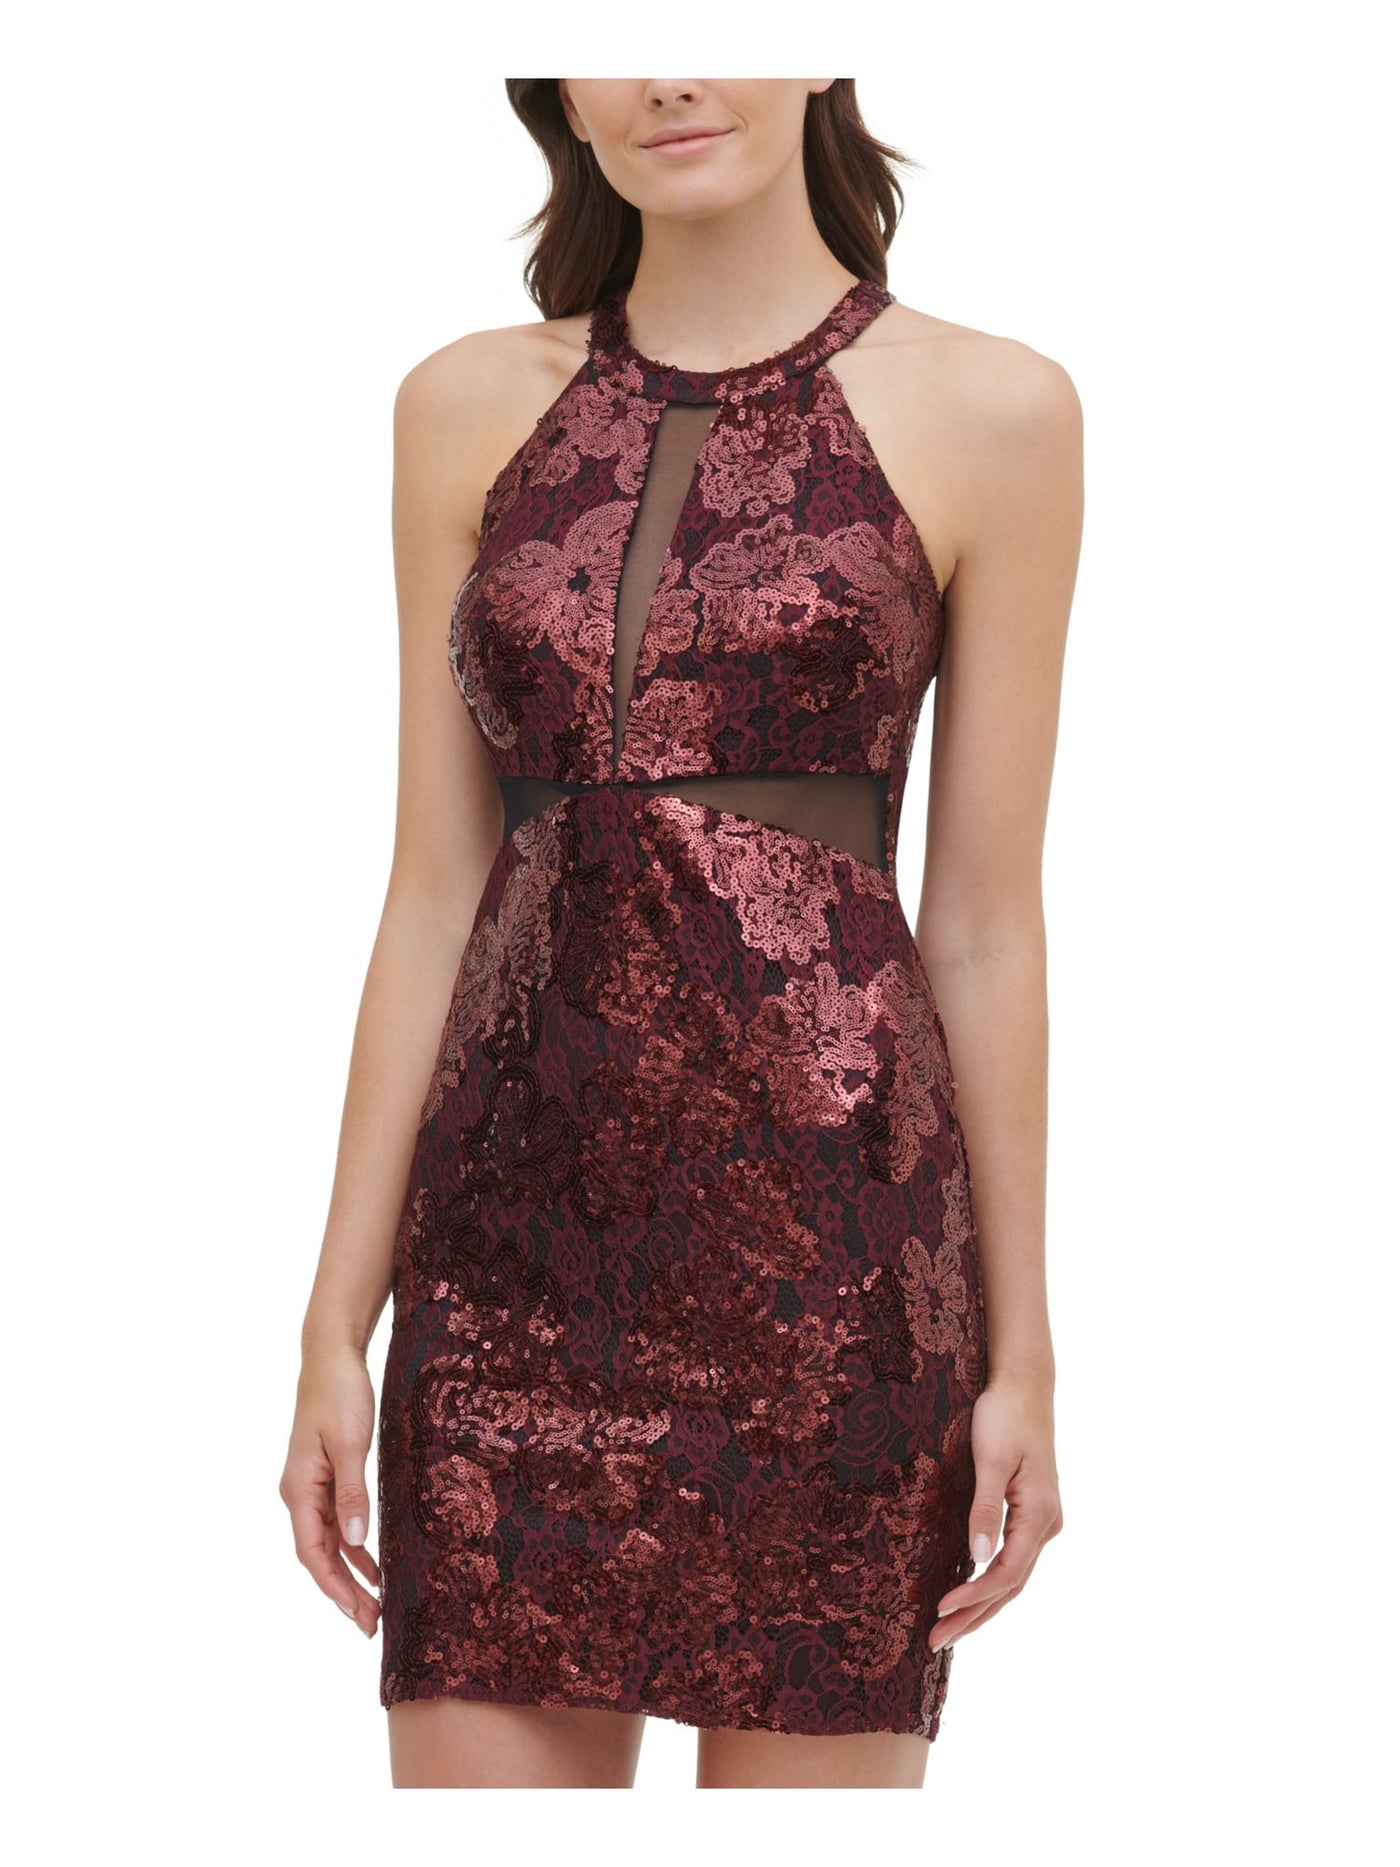 GUESS Womens Burgundy Sequined Zippered Sleeveless Halter Short Party Body Con Dress 4